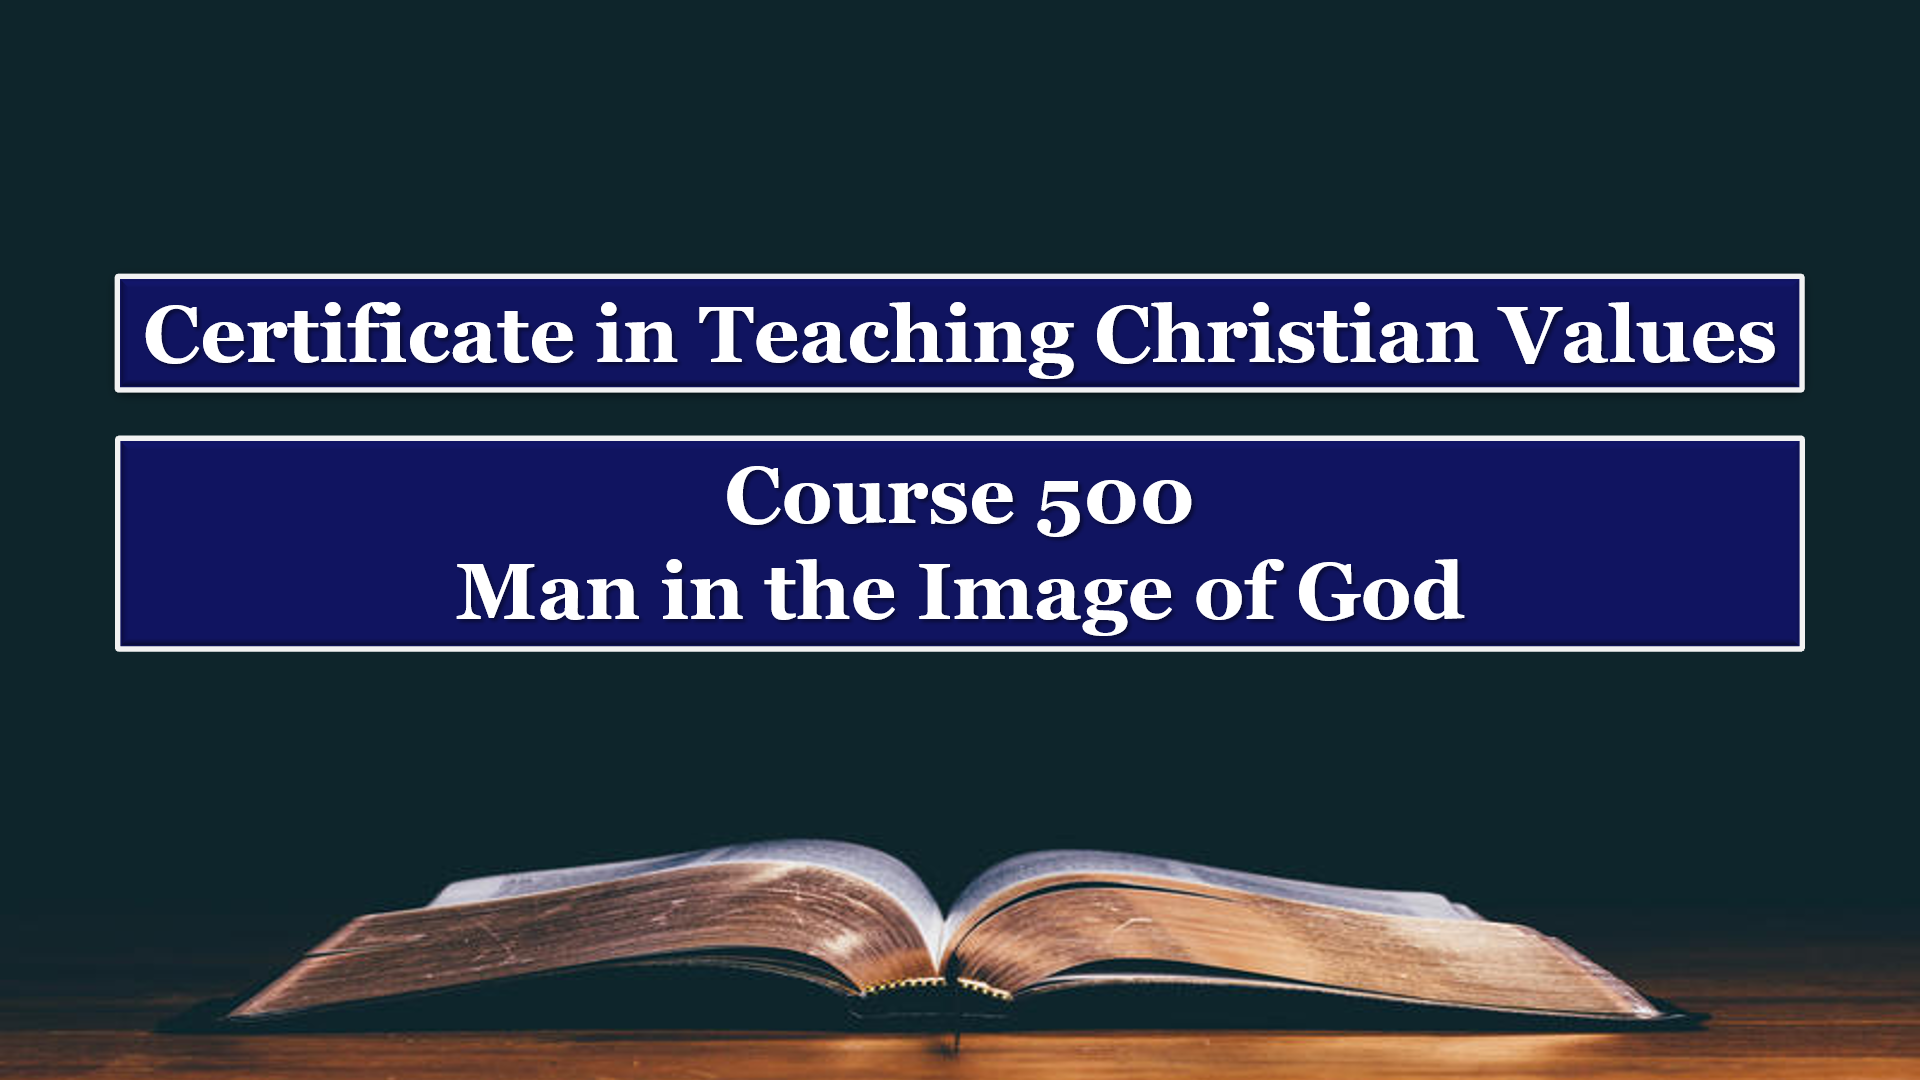 Course 500: Man in the Image of God